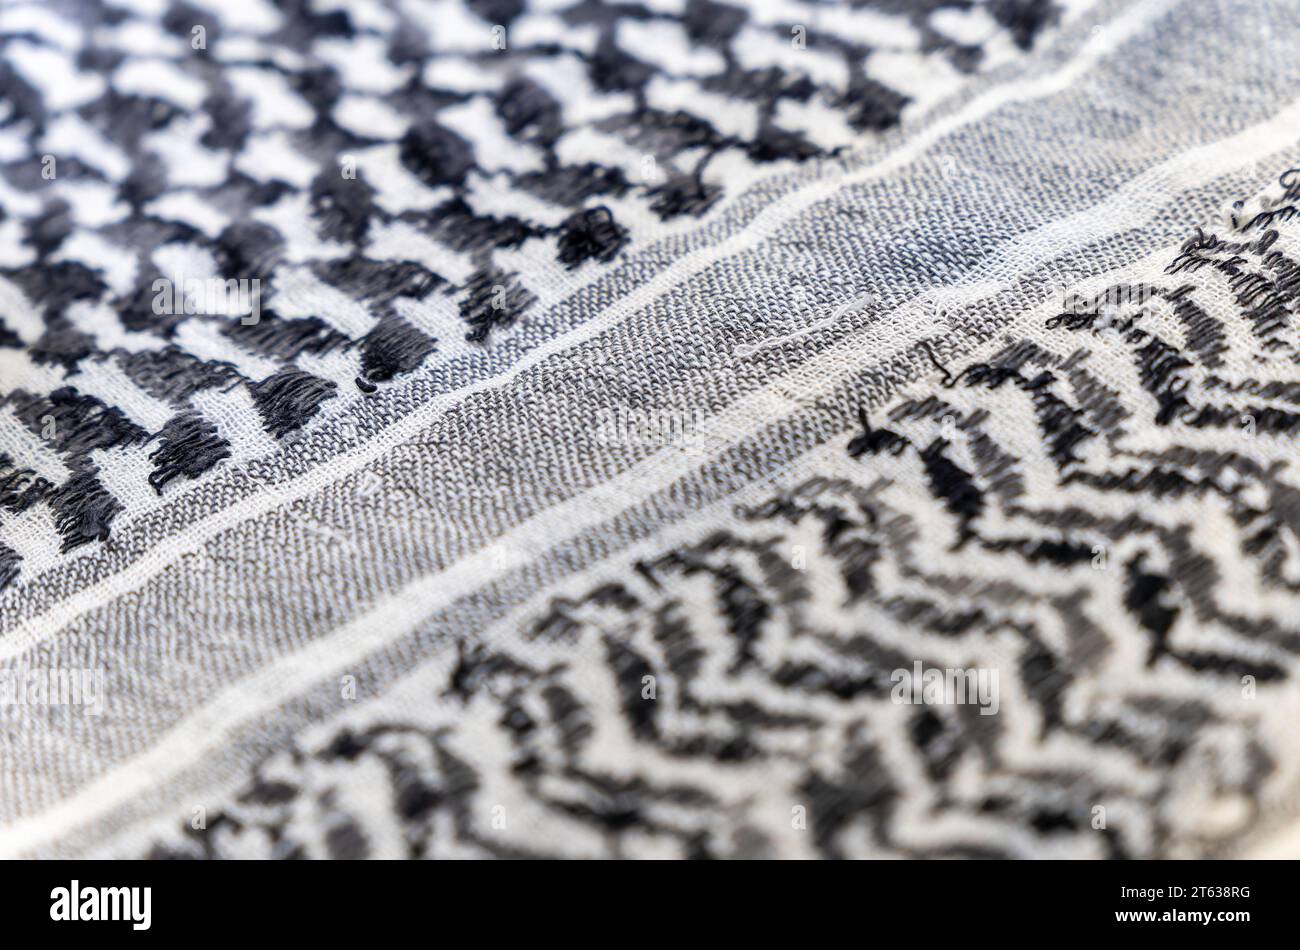 close-up of a Palestinian headscarf or kufiya. The traditional black and white headscarf of the Arab man (Keffiyeh). The weave forms a diagonal path Stock Photo